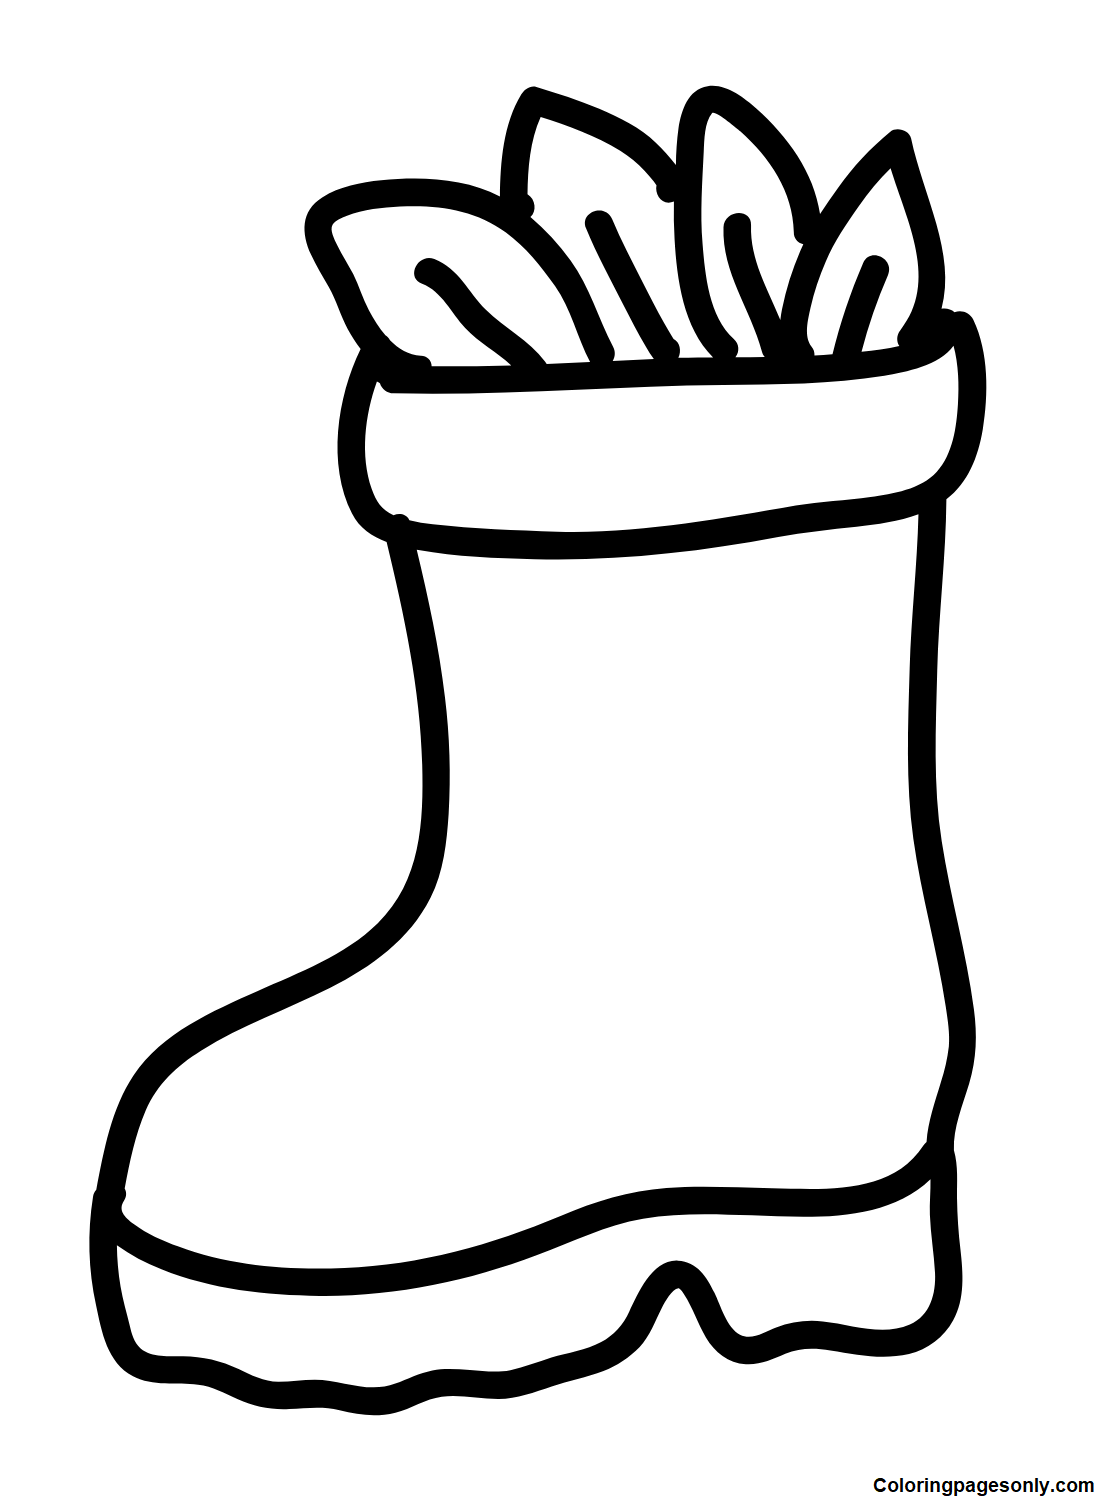 Boots with Leaves Coloring Page